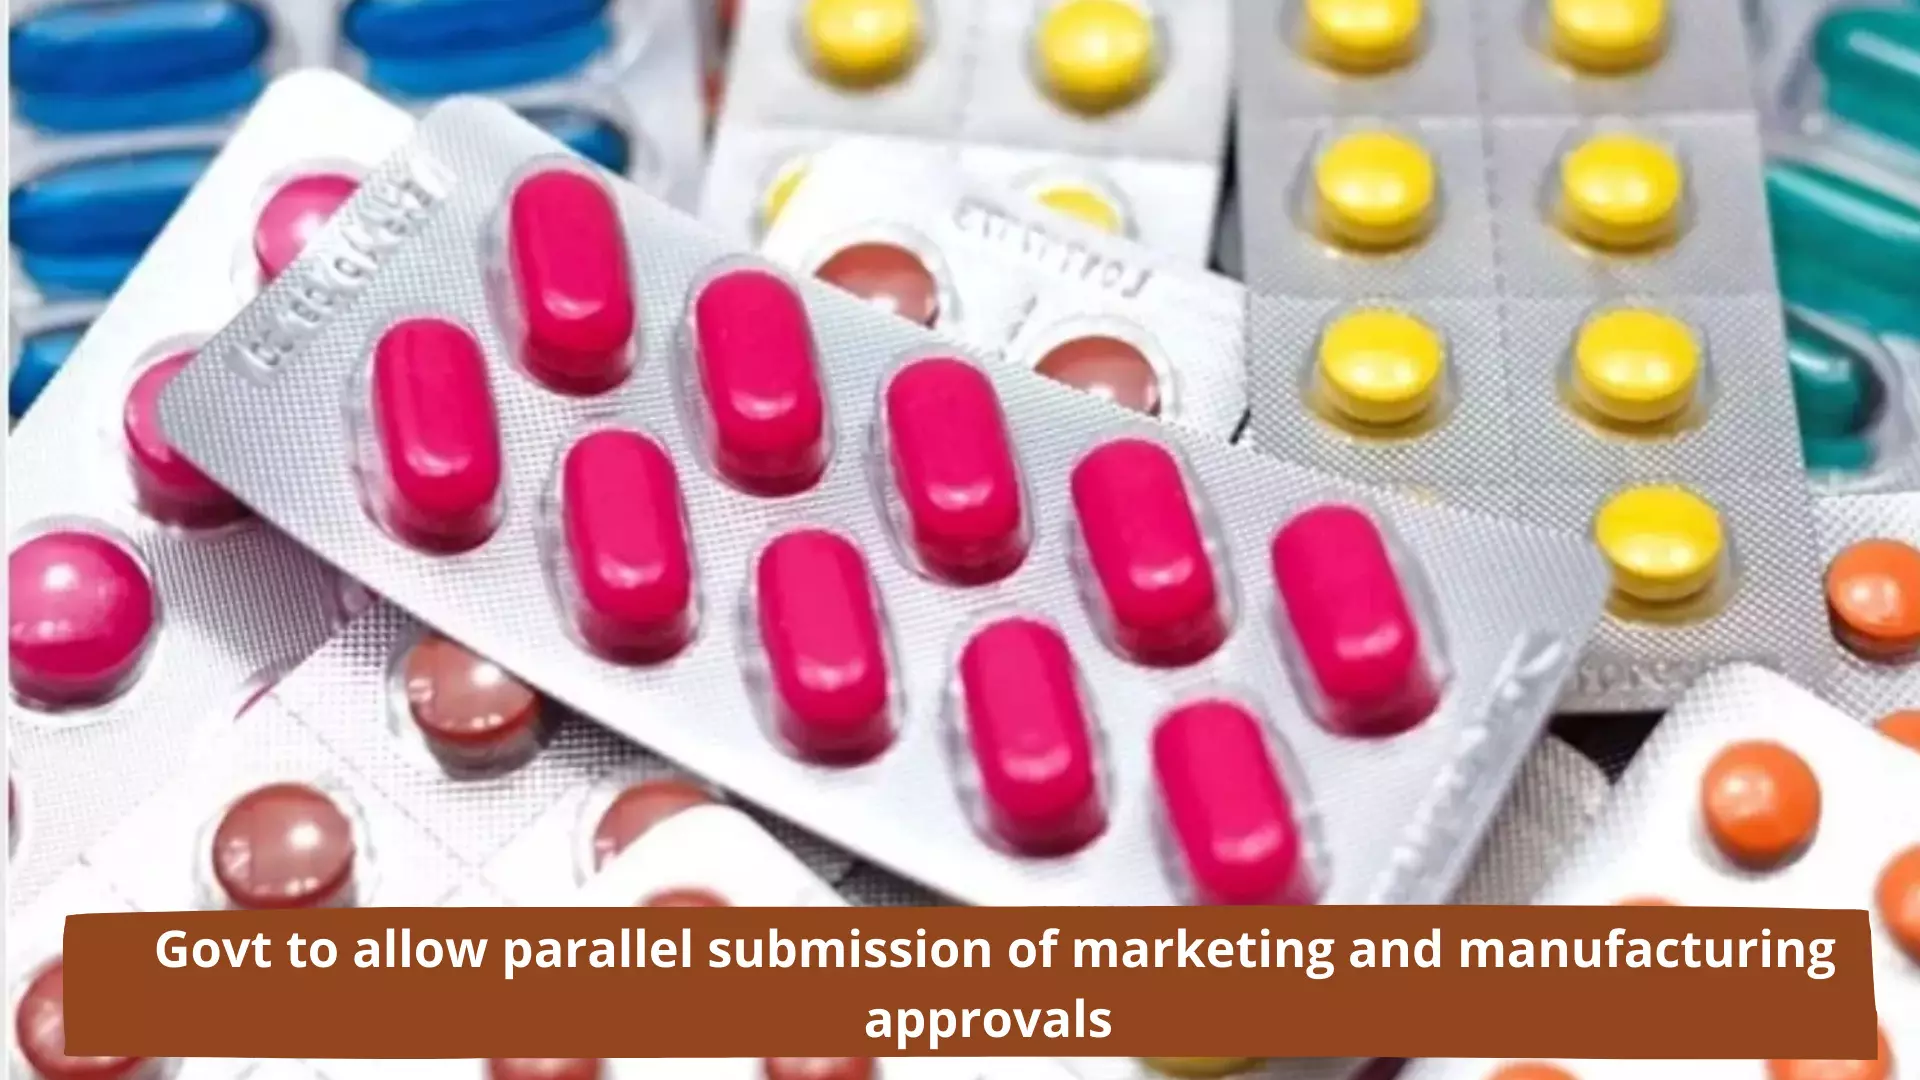 Govt to allow parallel submission of marketing, manufacturing approvals